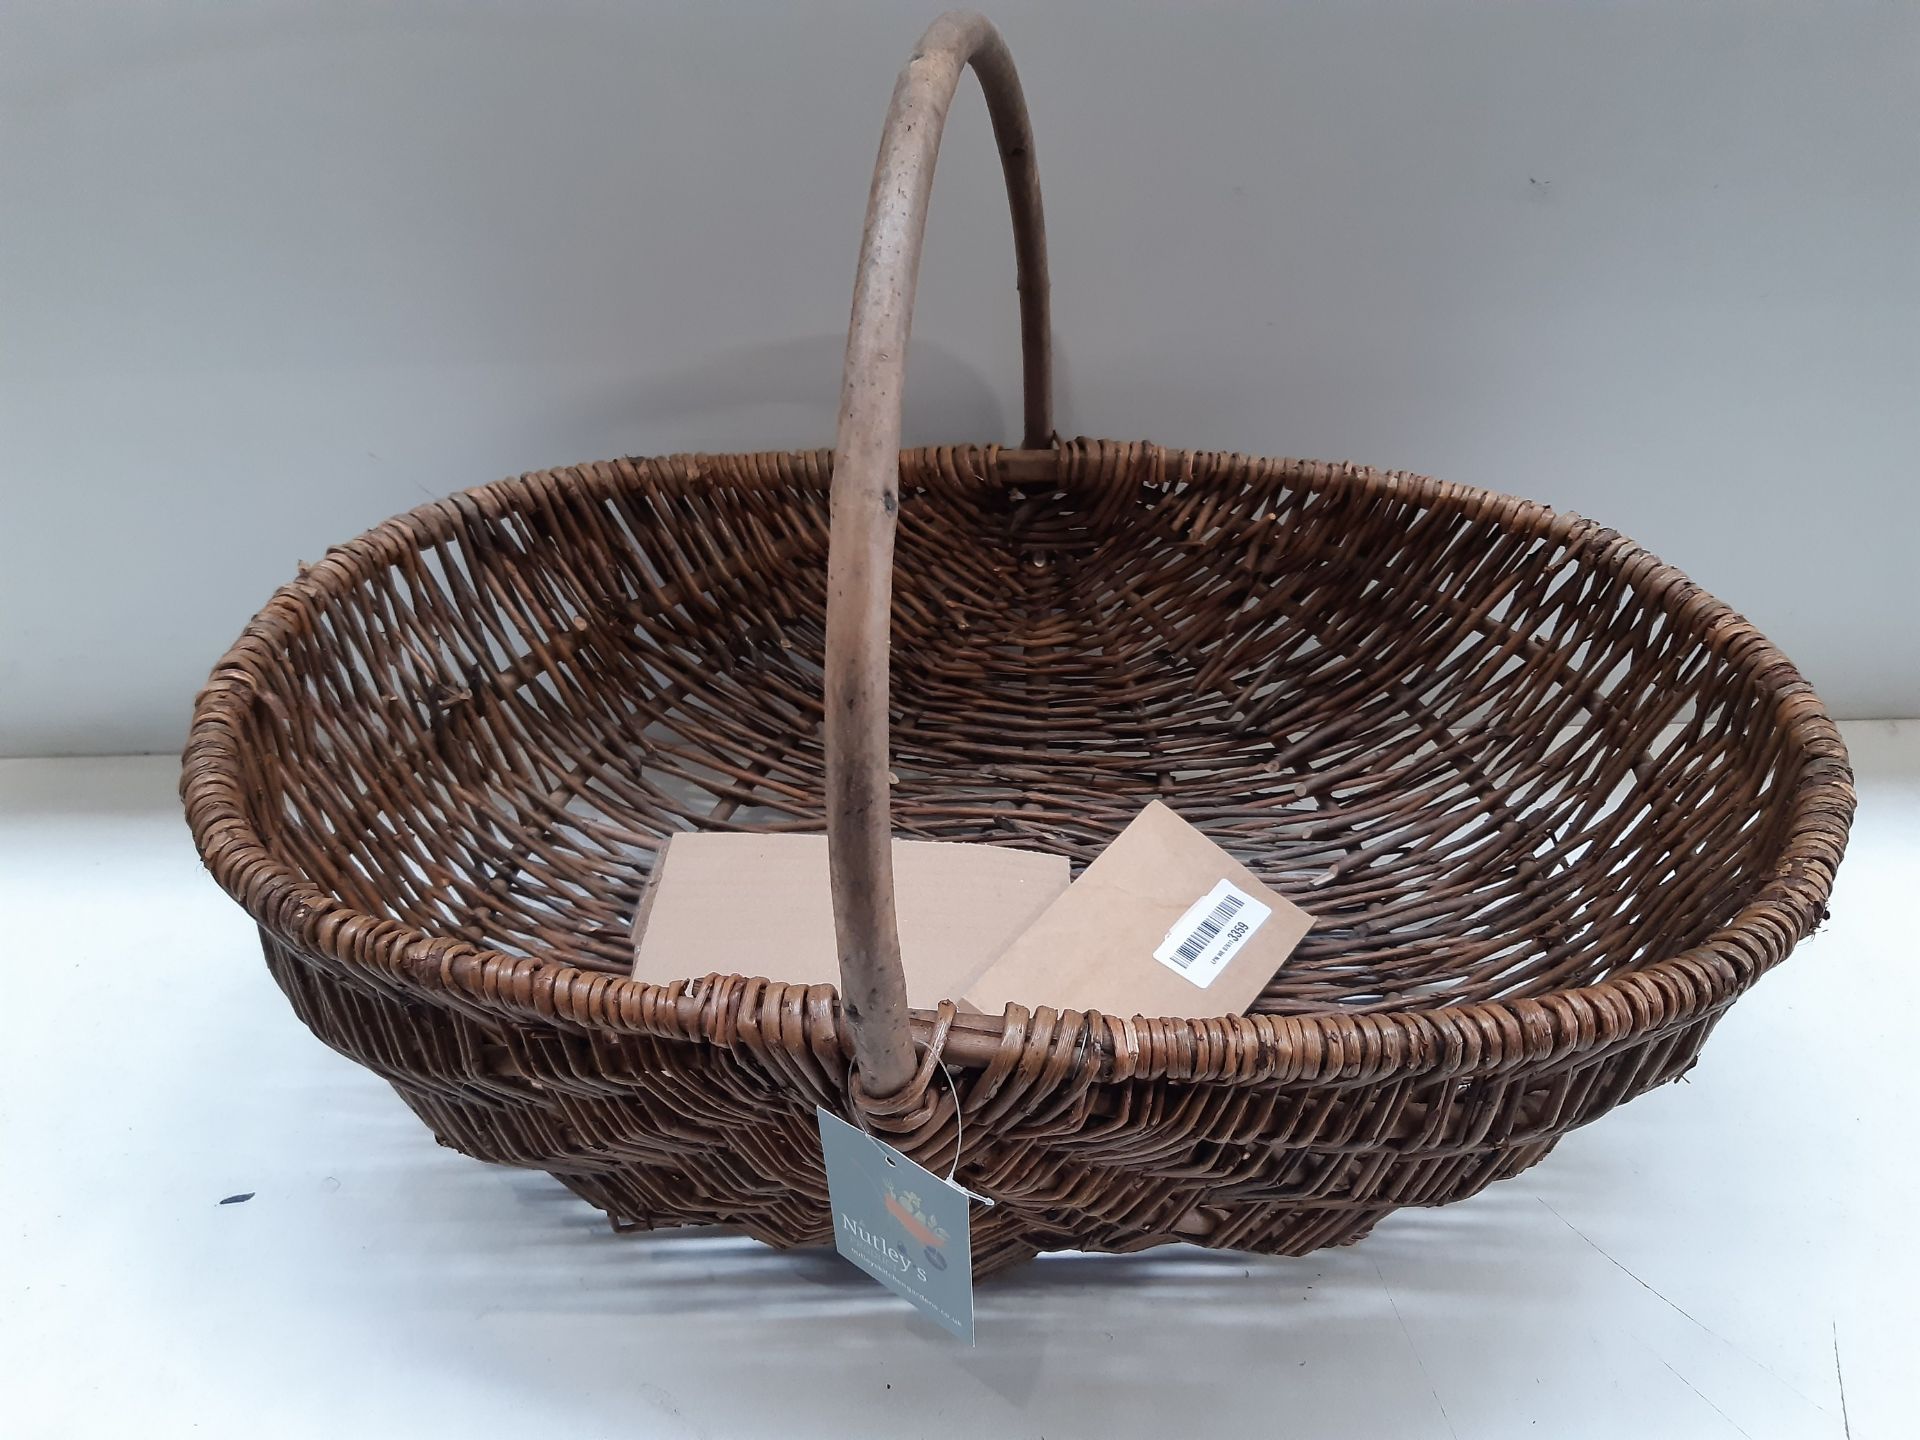 RRP £30.95 Nutley's Large Rustic Willow Vegetable Trug Basket - Image 2 of 2